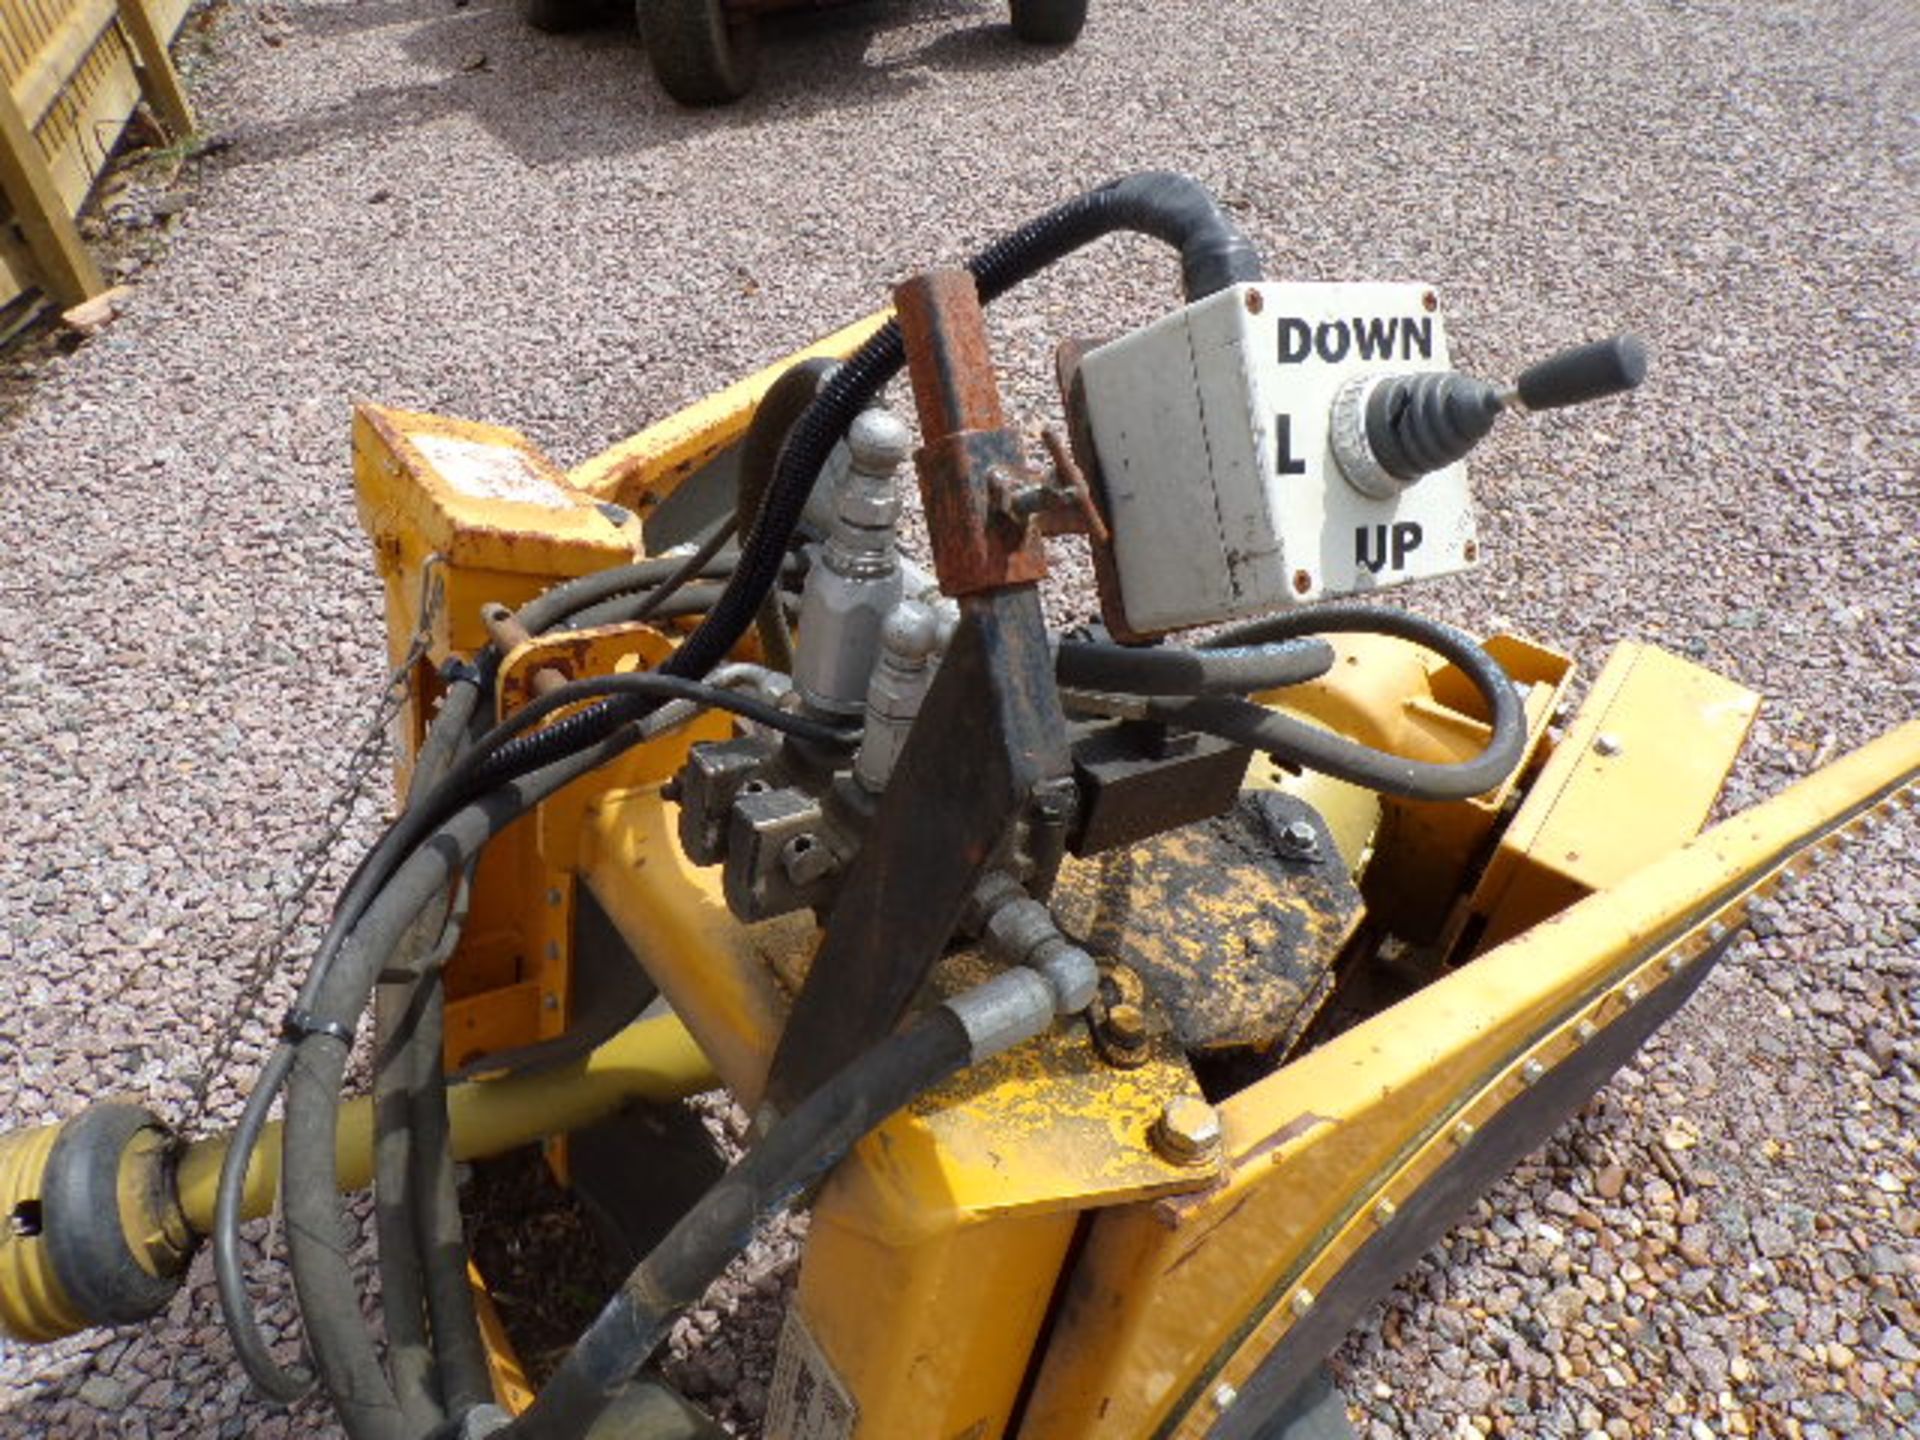 BLEC SG100 STUMP GRINDER - POWERFUL PTO DRIVEN GRINDING WHEEL, - Image 4 of 5